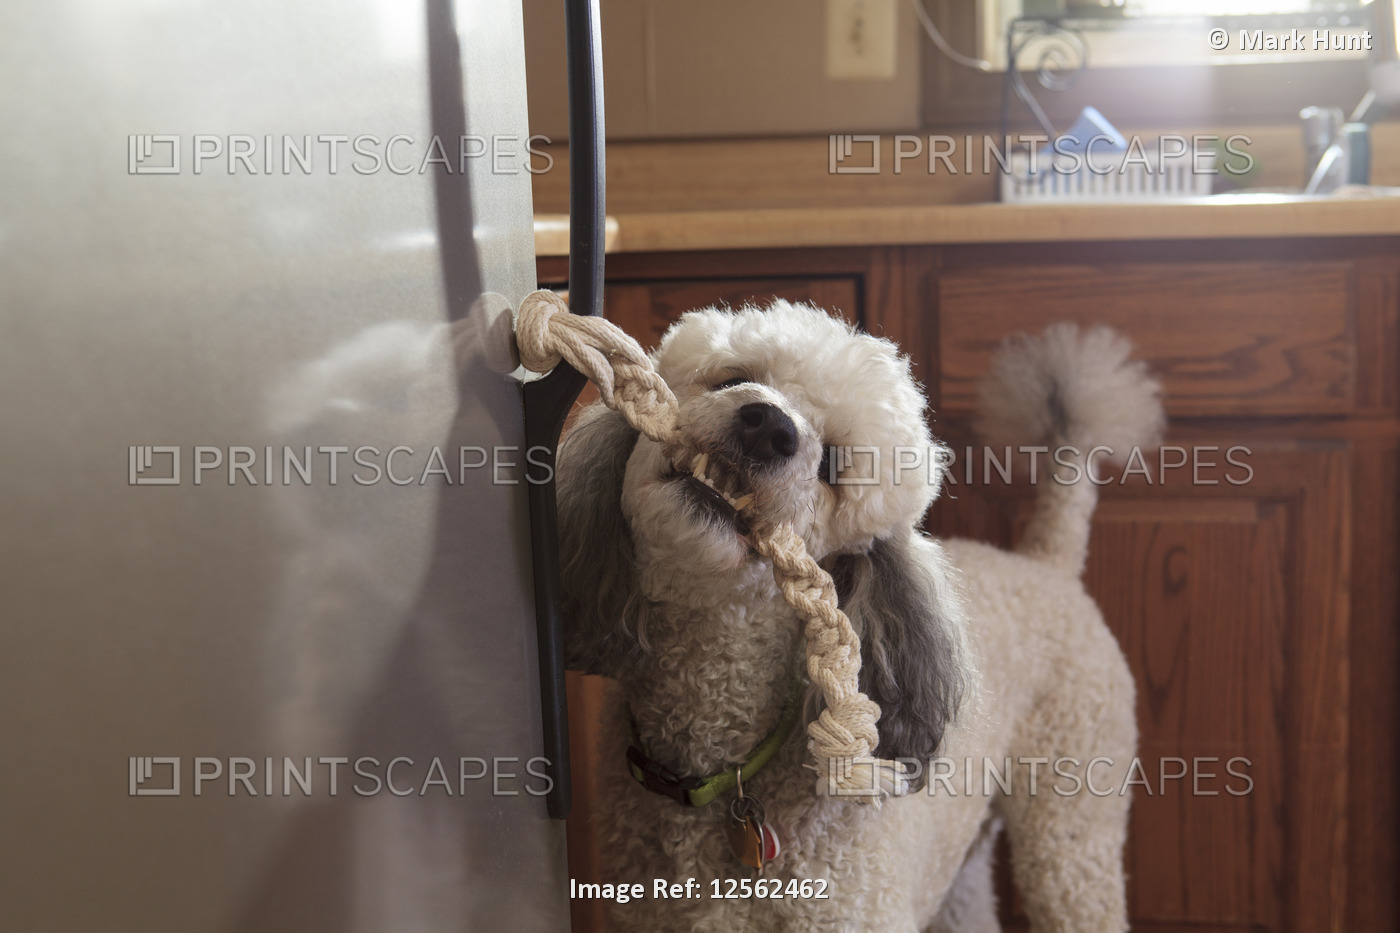 Poodle service dog opening a refrigerator with a handle